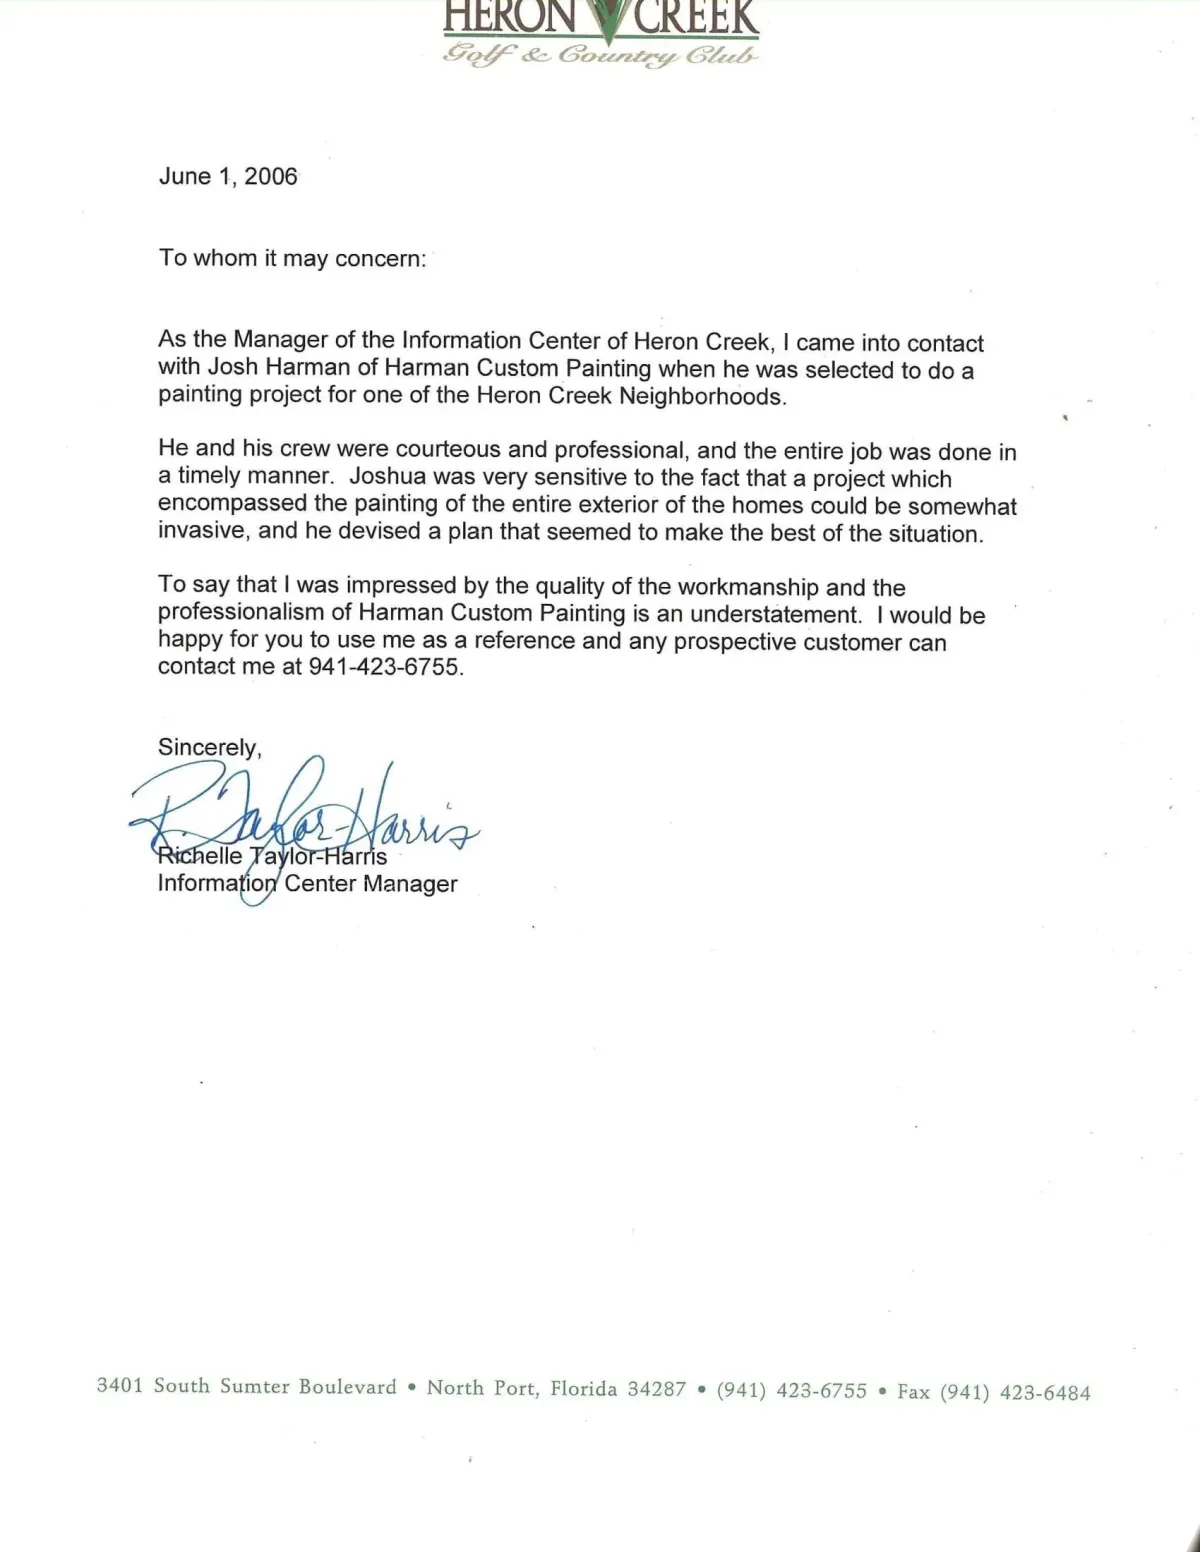 Letter of Recommendation - Heron Creek Information Center Manager, Richelle Taylor-Harris